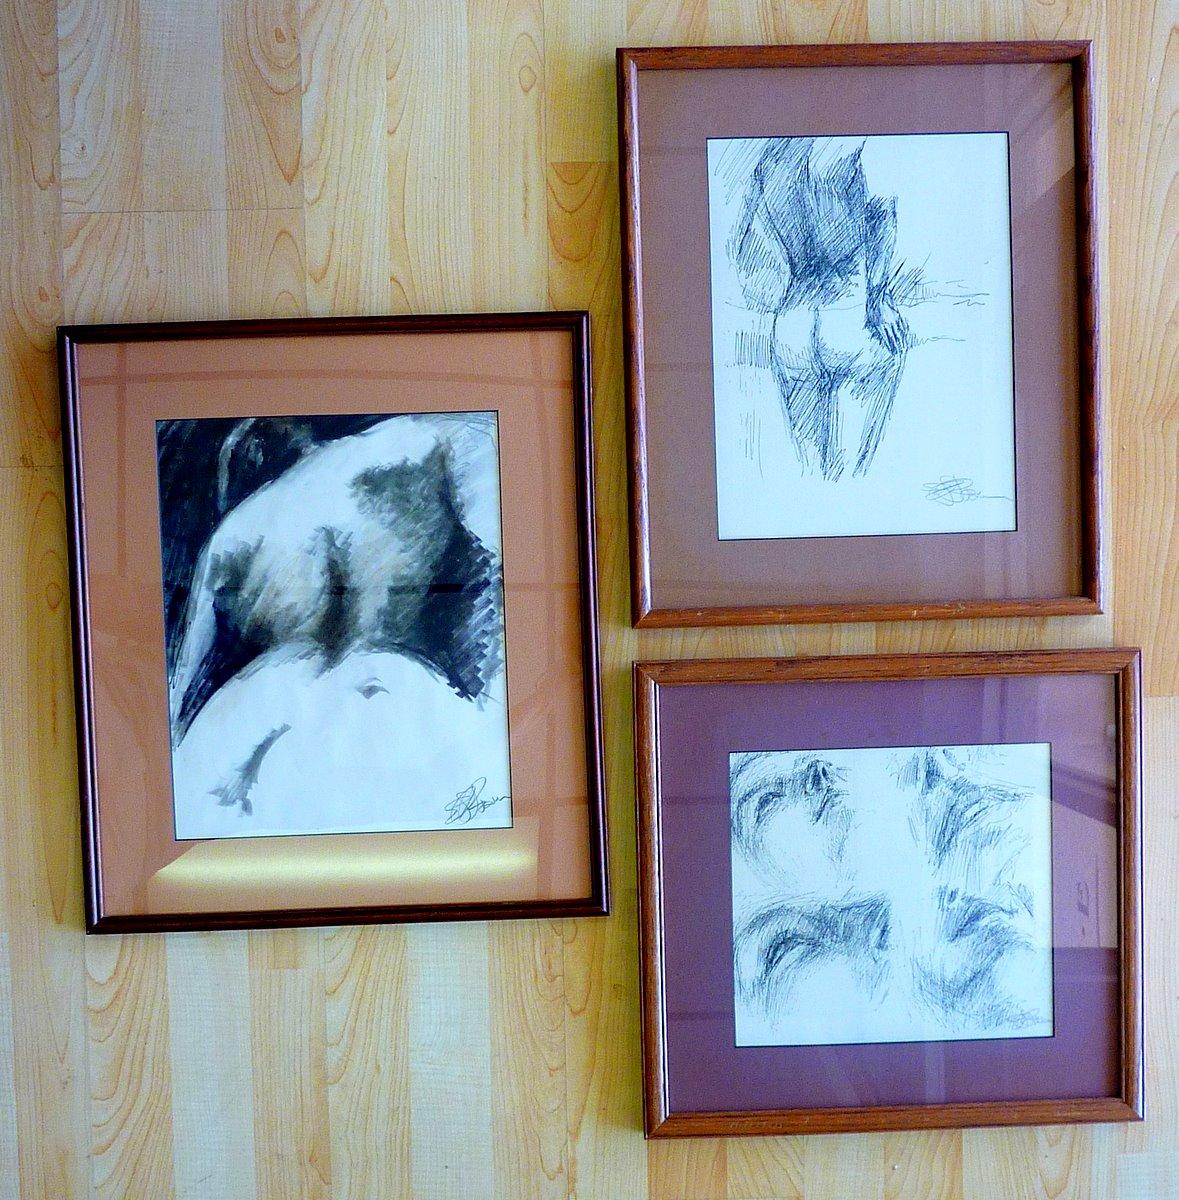 A set of three exceptional sketches by listed artist Ed Rosen (American, 1928-2012), all bearing original signatures.

Dimensions, as framed, shown clockwise from left:
17